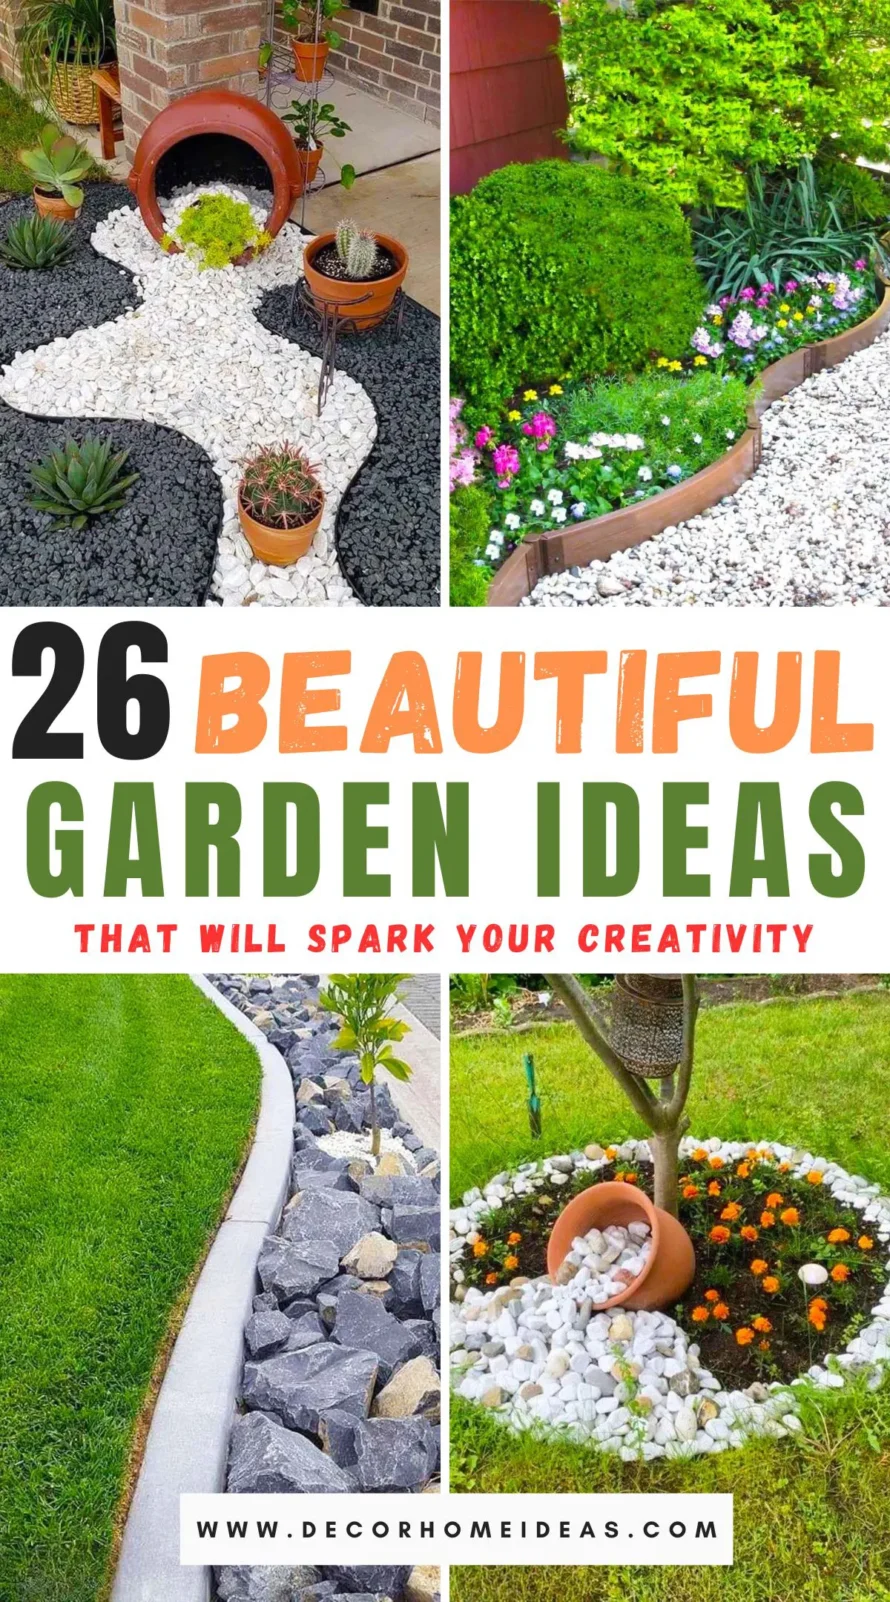 Discover 26 unique garden designs that will ignite your creativity and transform your outdoor space. From quaint cottage gardens to modern minimalist landscapes, find inspiration to create your own garden paradise. Dive in to explore these unforgettable ideas!